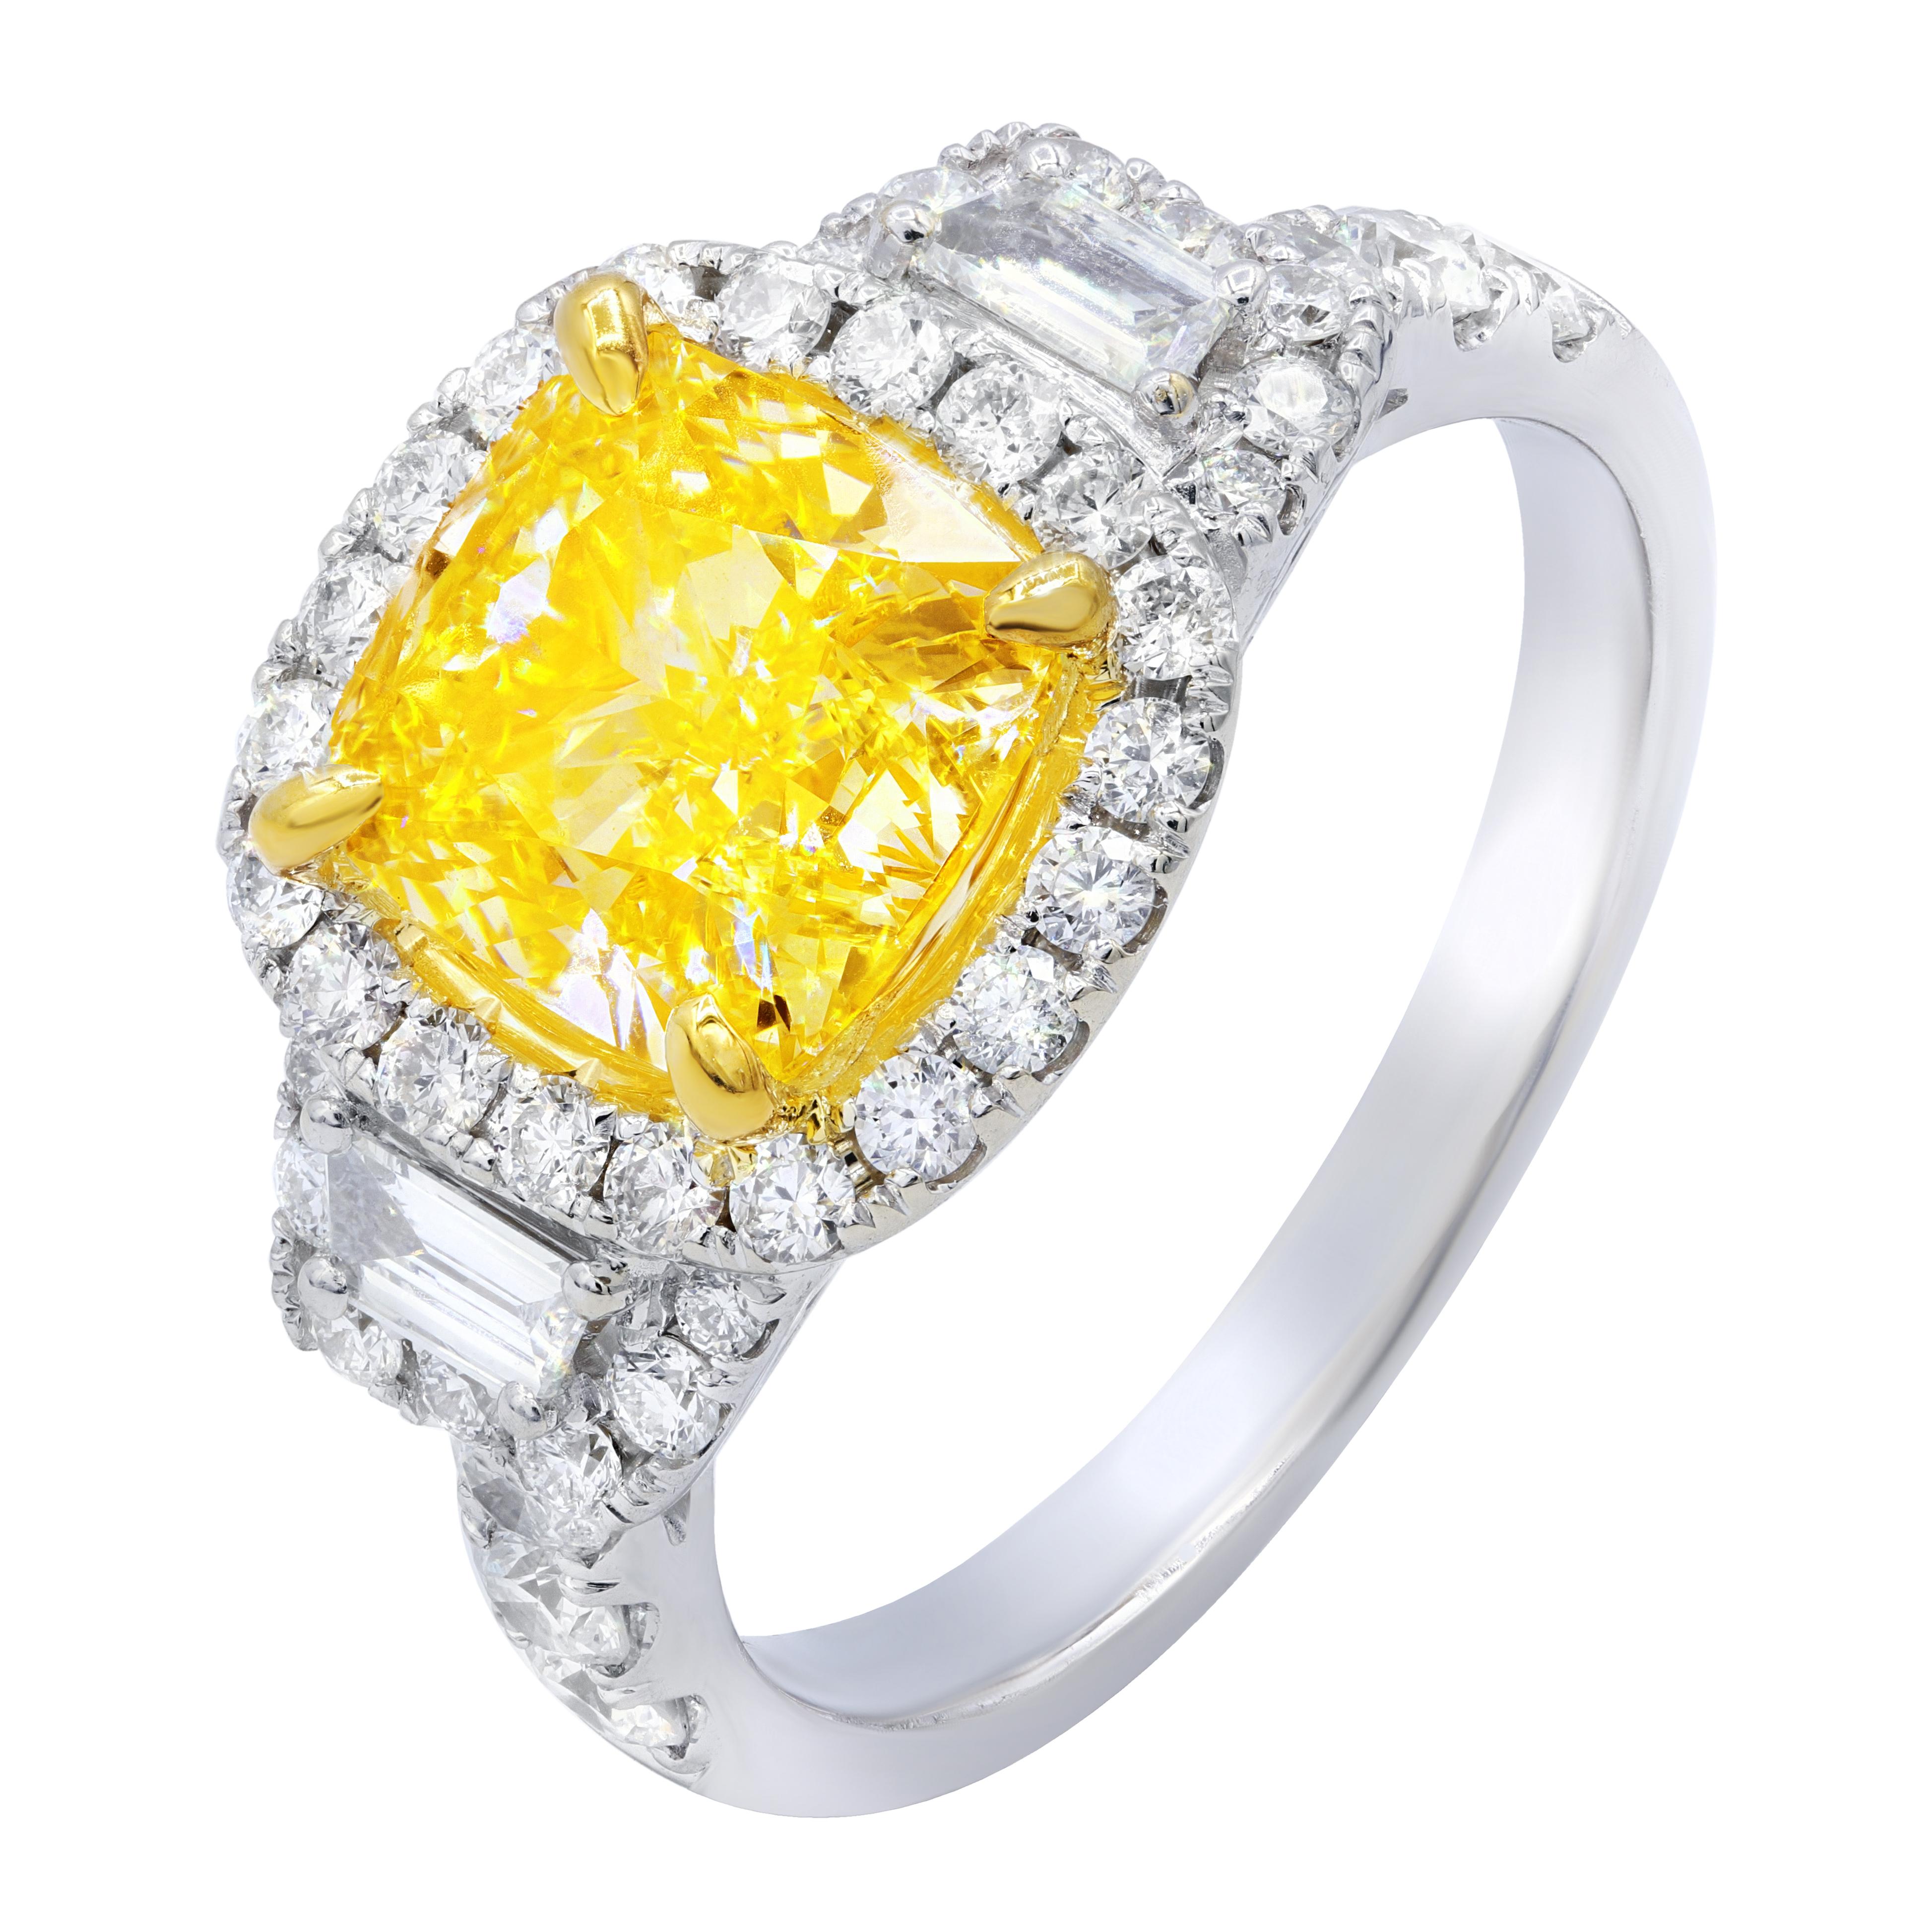 Fancy Yellow Diamond Ring Set in Halo Settings with Trapezoids For Sale